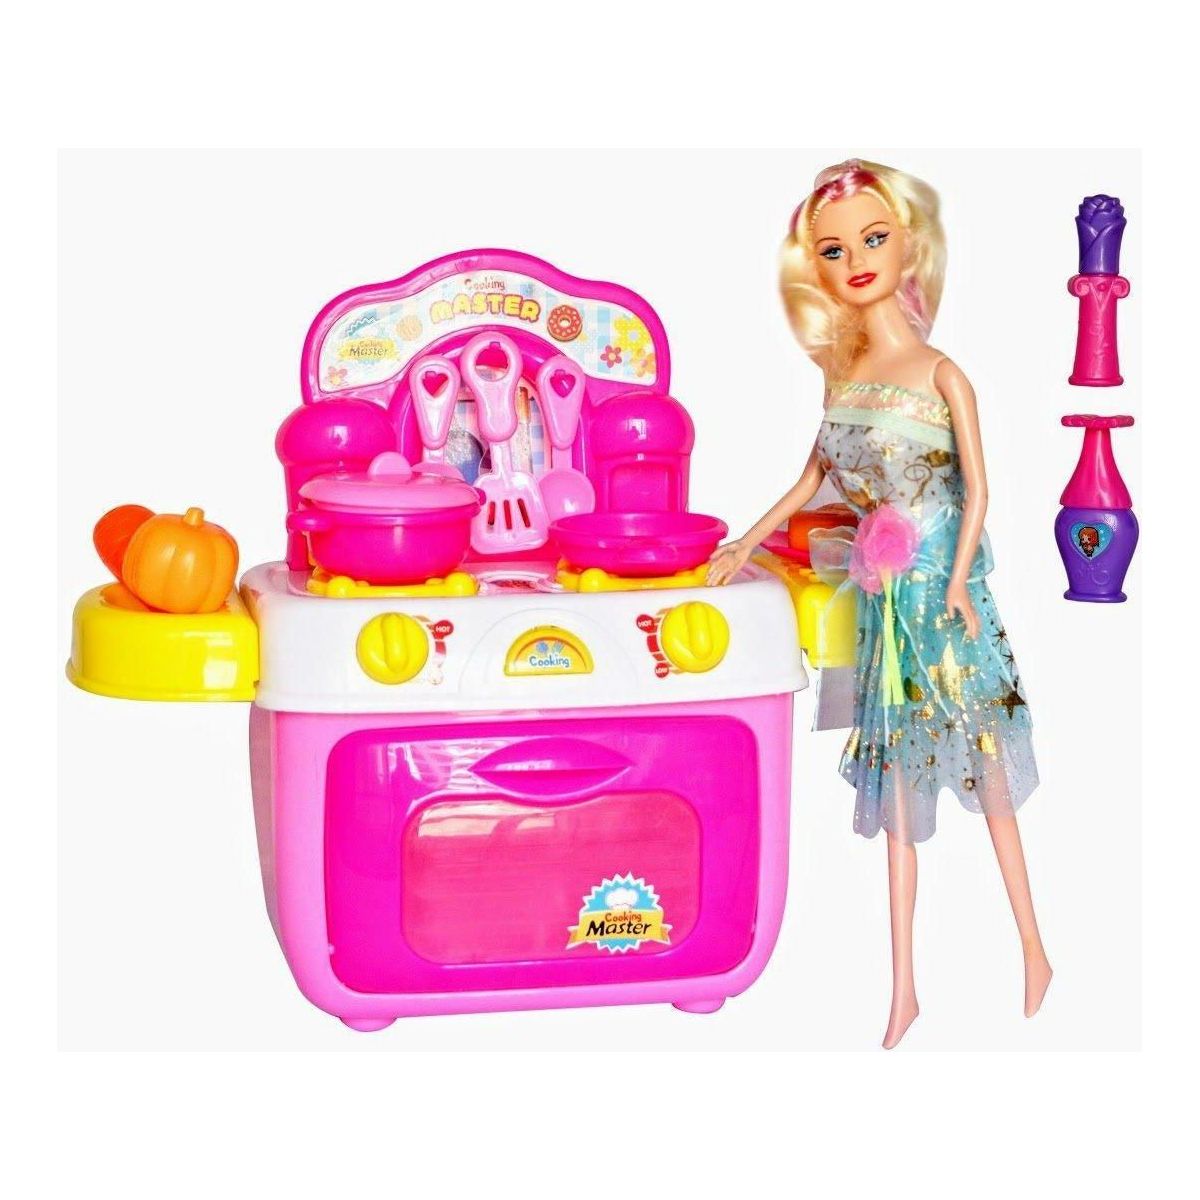 Cooking Master Luxury Kitchen Set With Doll - BumbleToys - 5-7 Years, Girls, Kitchen & Play Sets